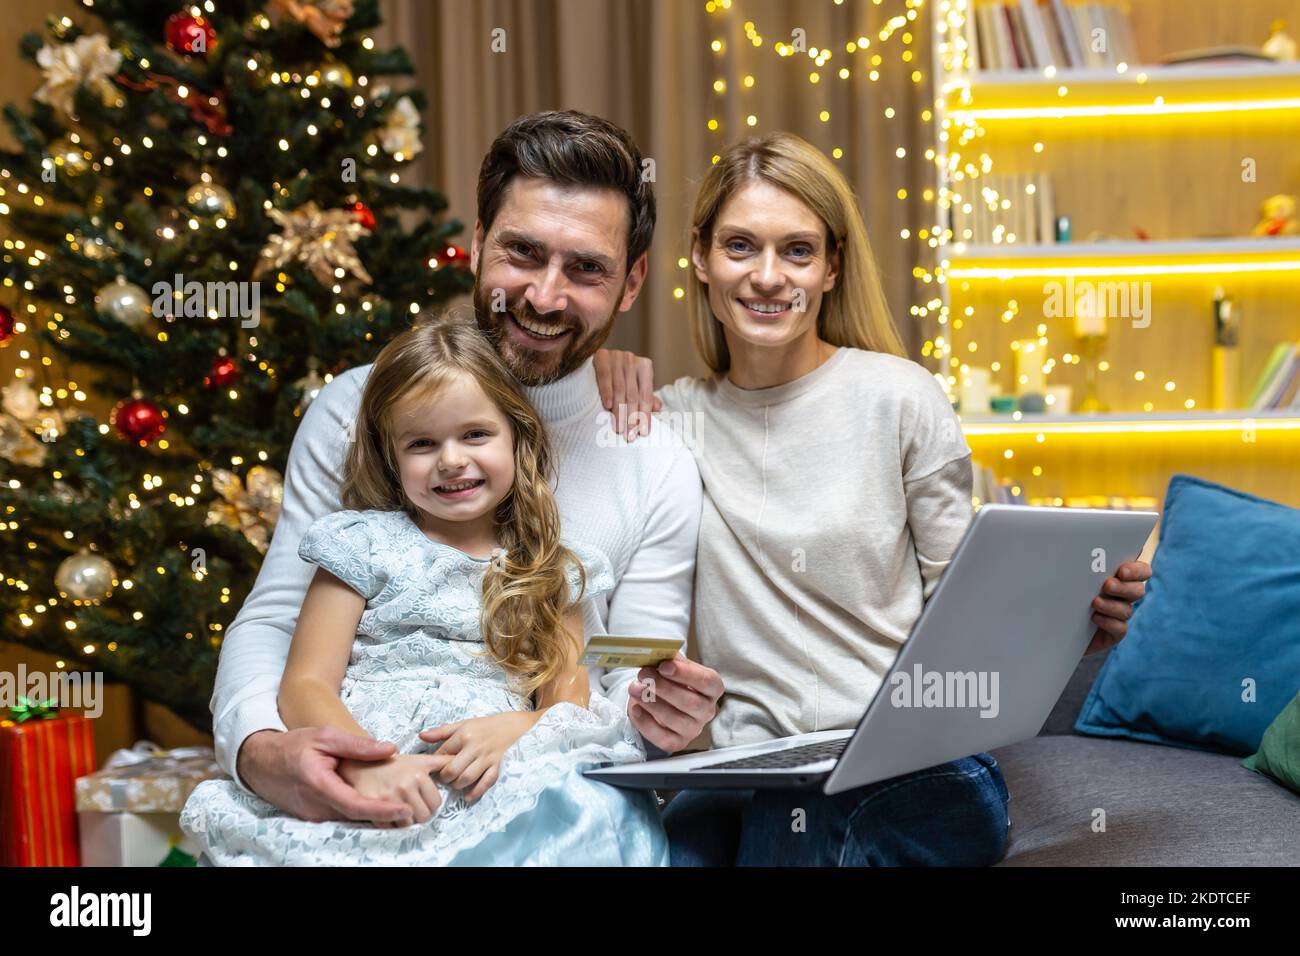 Portrait of a young family sitting on the sofa at home near the Christmas tree. Holding laptop and credit card, choosing Christmas gifts online. They look at the camera, smile. Stock Photo